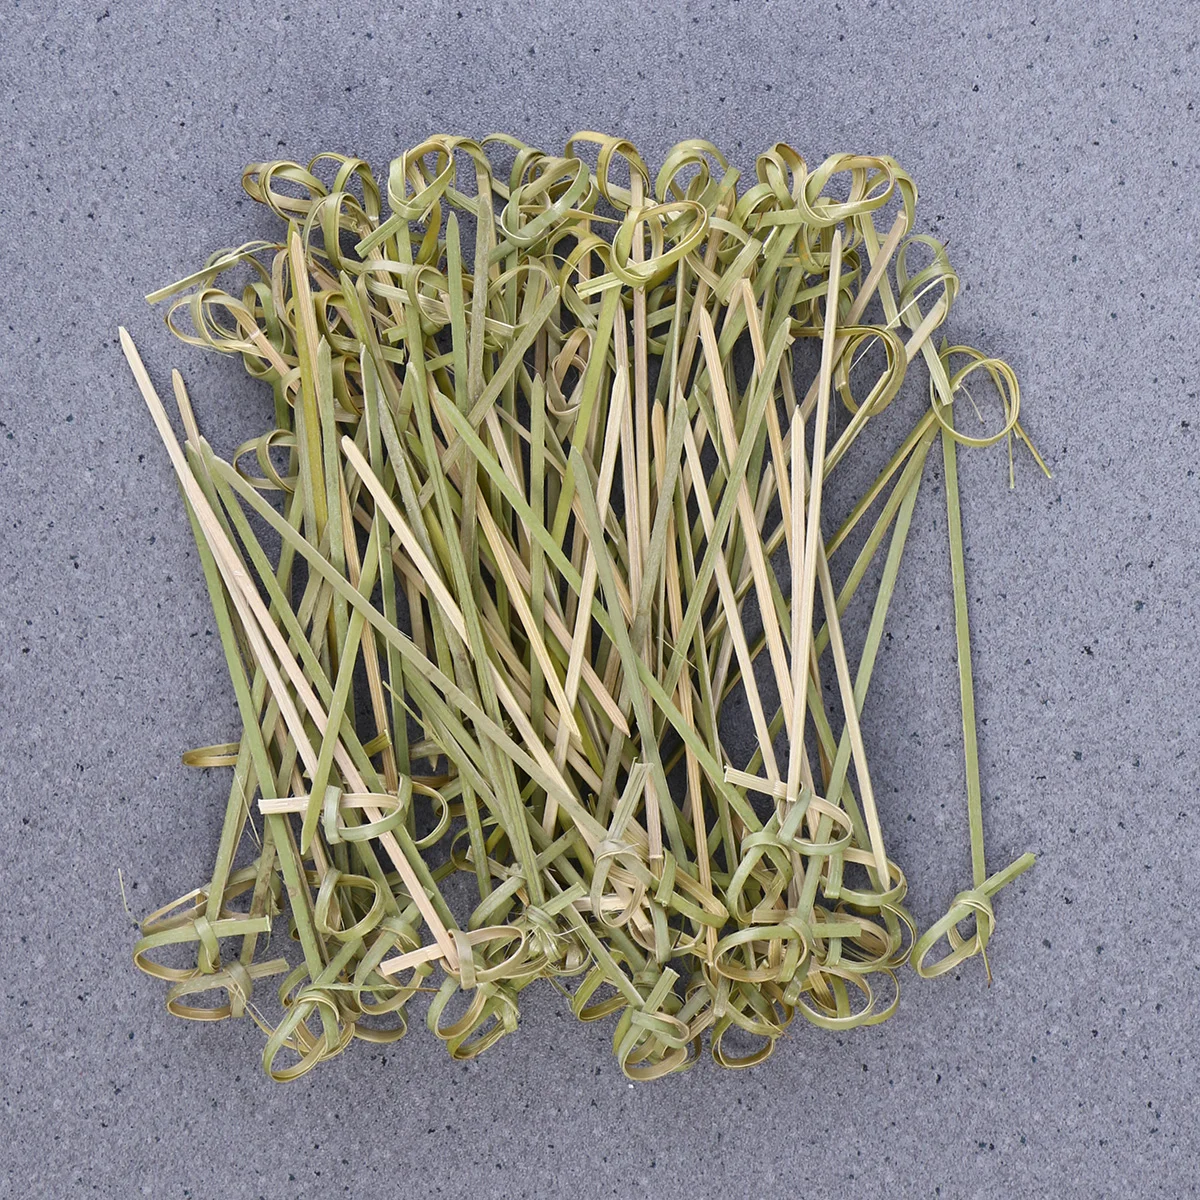 

Disposable Bamboo Knot Skewers Cocktail Picks with Twisted Ends for Cocktail Party Barbeque Snacks Club Sandwiches